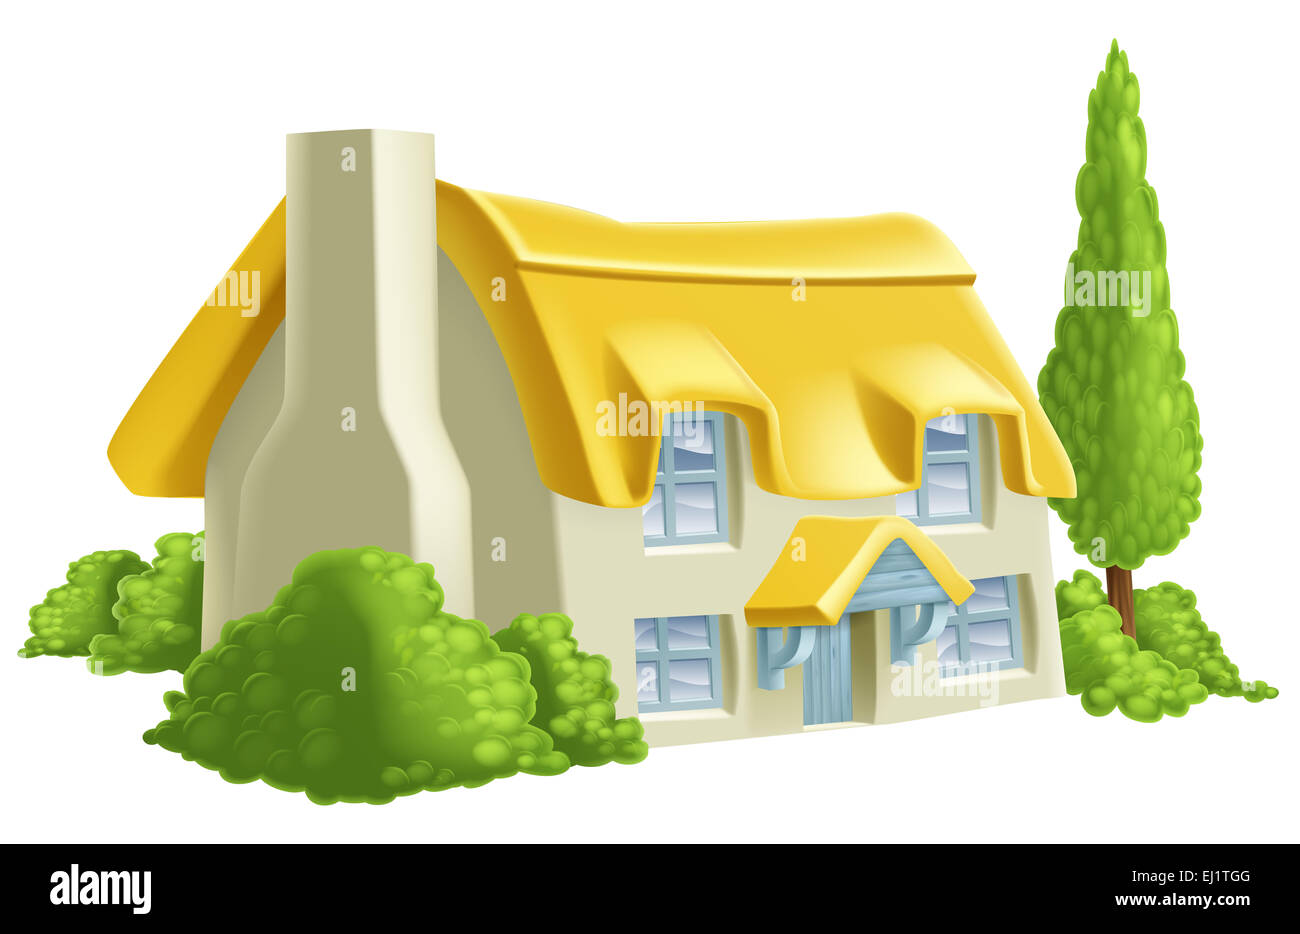 An illustration of a thatched country cottage or farm house Stock Photo